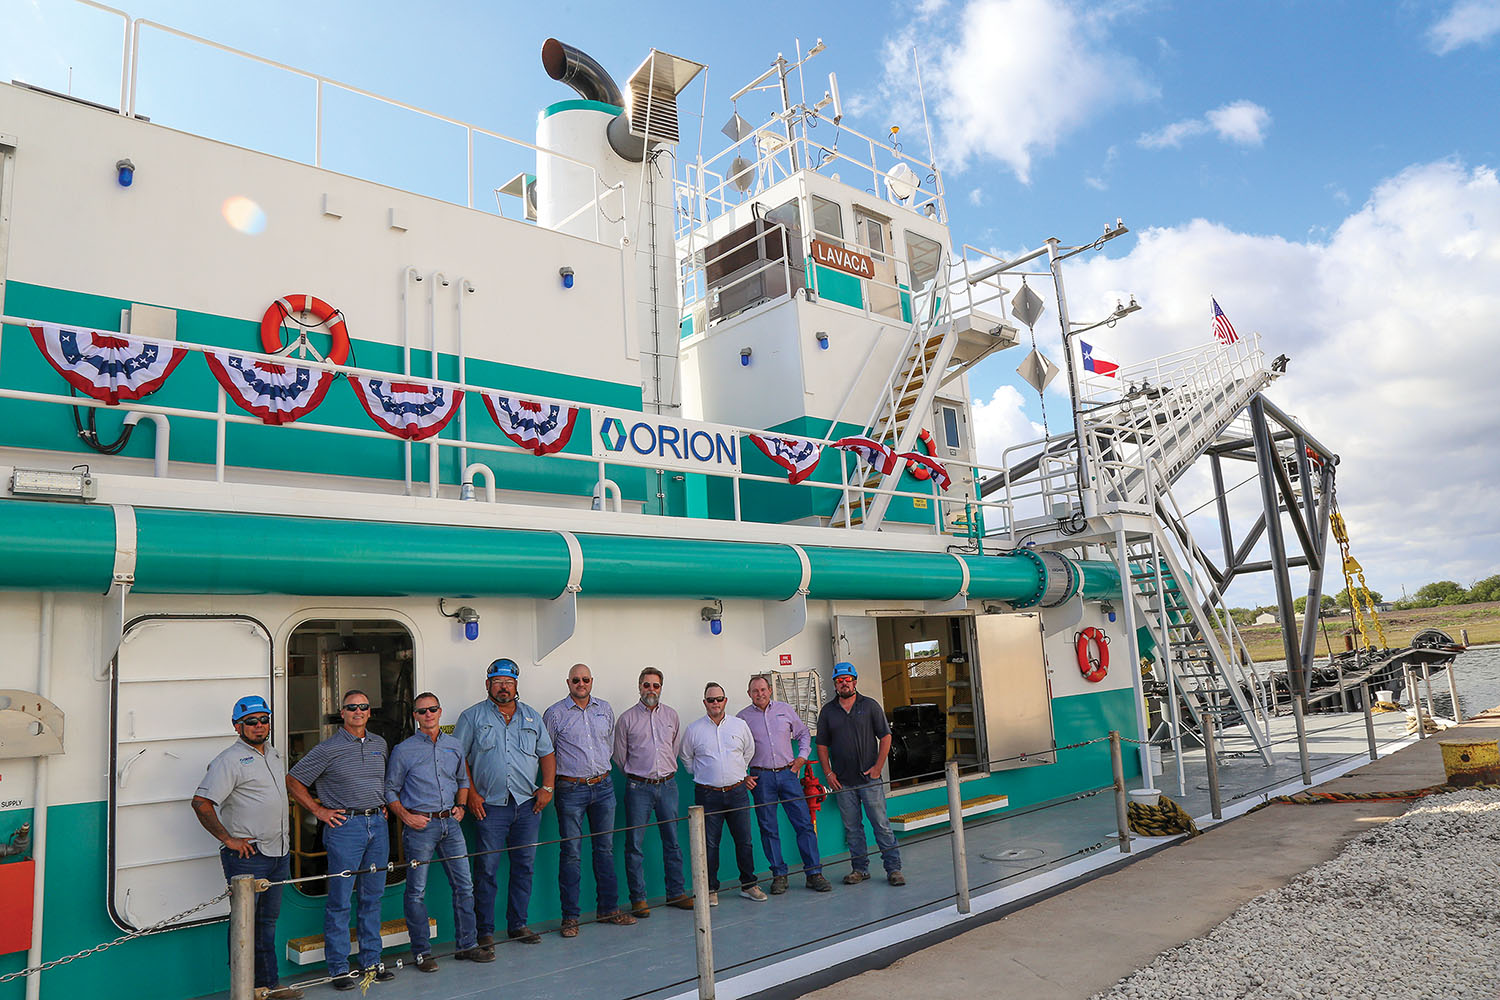 Crew members and officials aboard the Orion Marine Group dredge Lavaca. (Photo courtesy of Orion Marine Group)